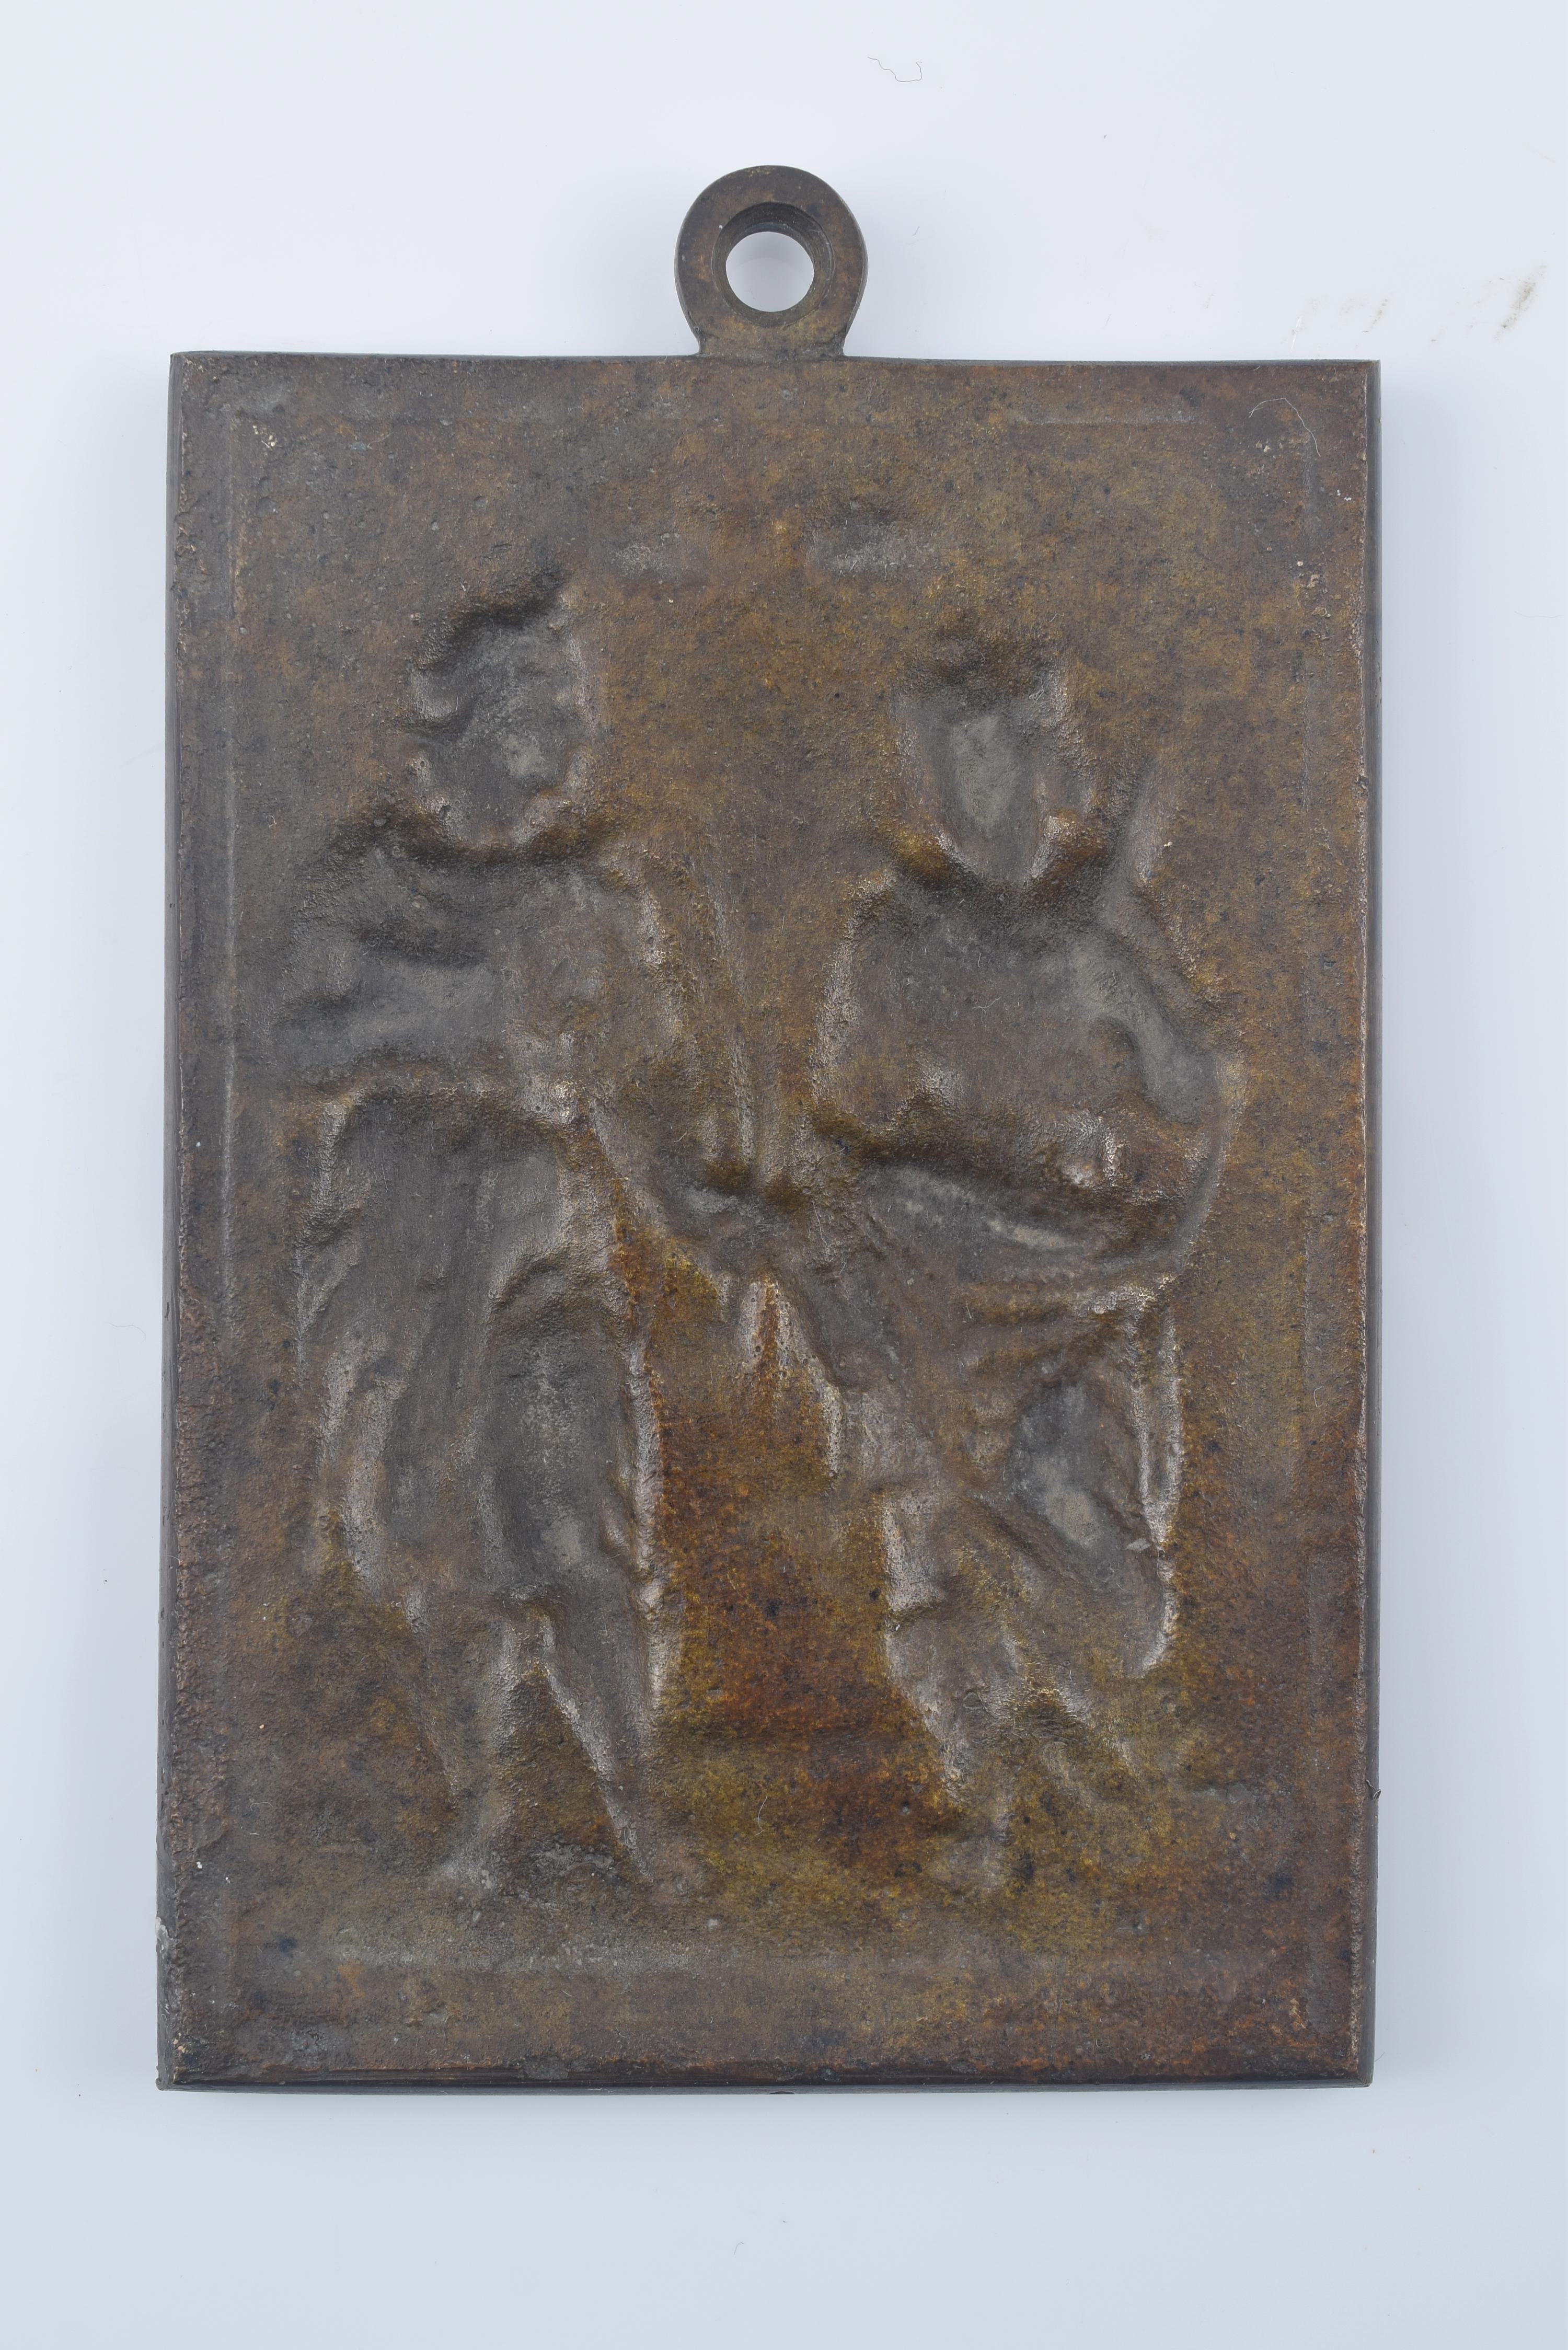 Devotional plaque, Holy Children Justo and Pastor. Bronze. Spanish school, 19th century. 
Bronze devotional plate with a rectangular shape that has a ring at the top and a frame of smooth moldings highlighting a figurative composition in relief. Two